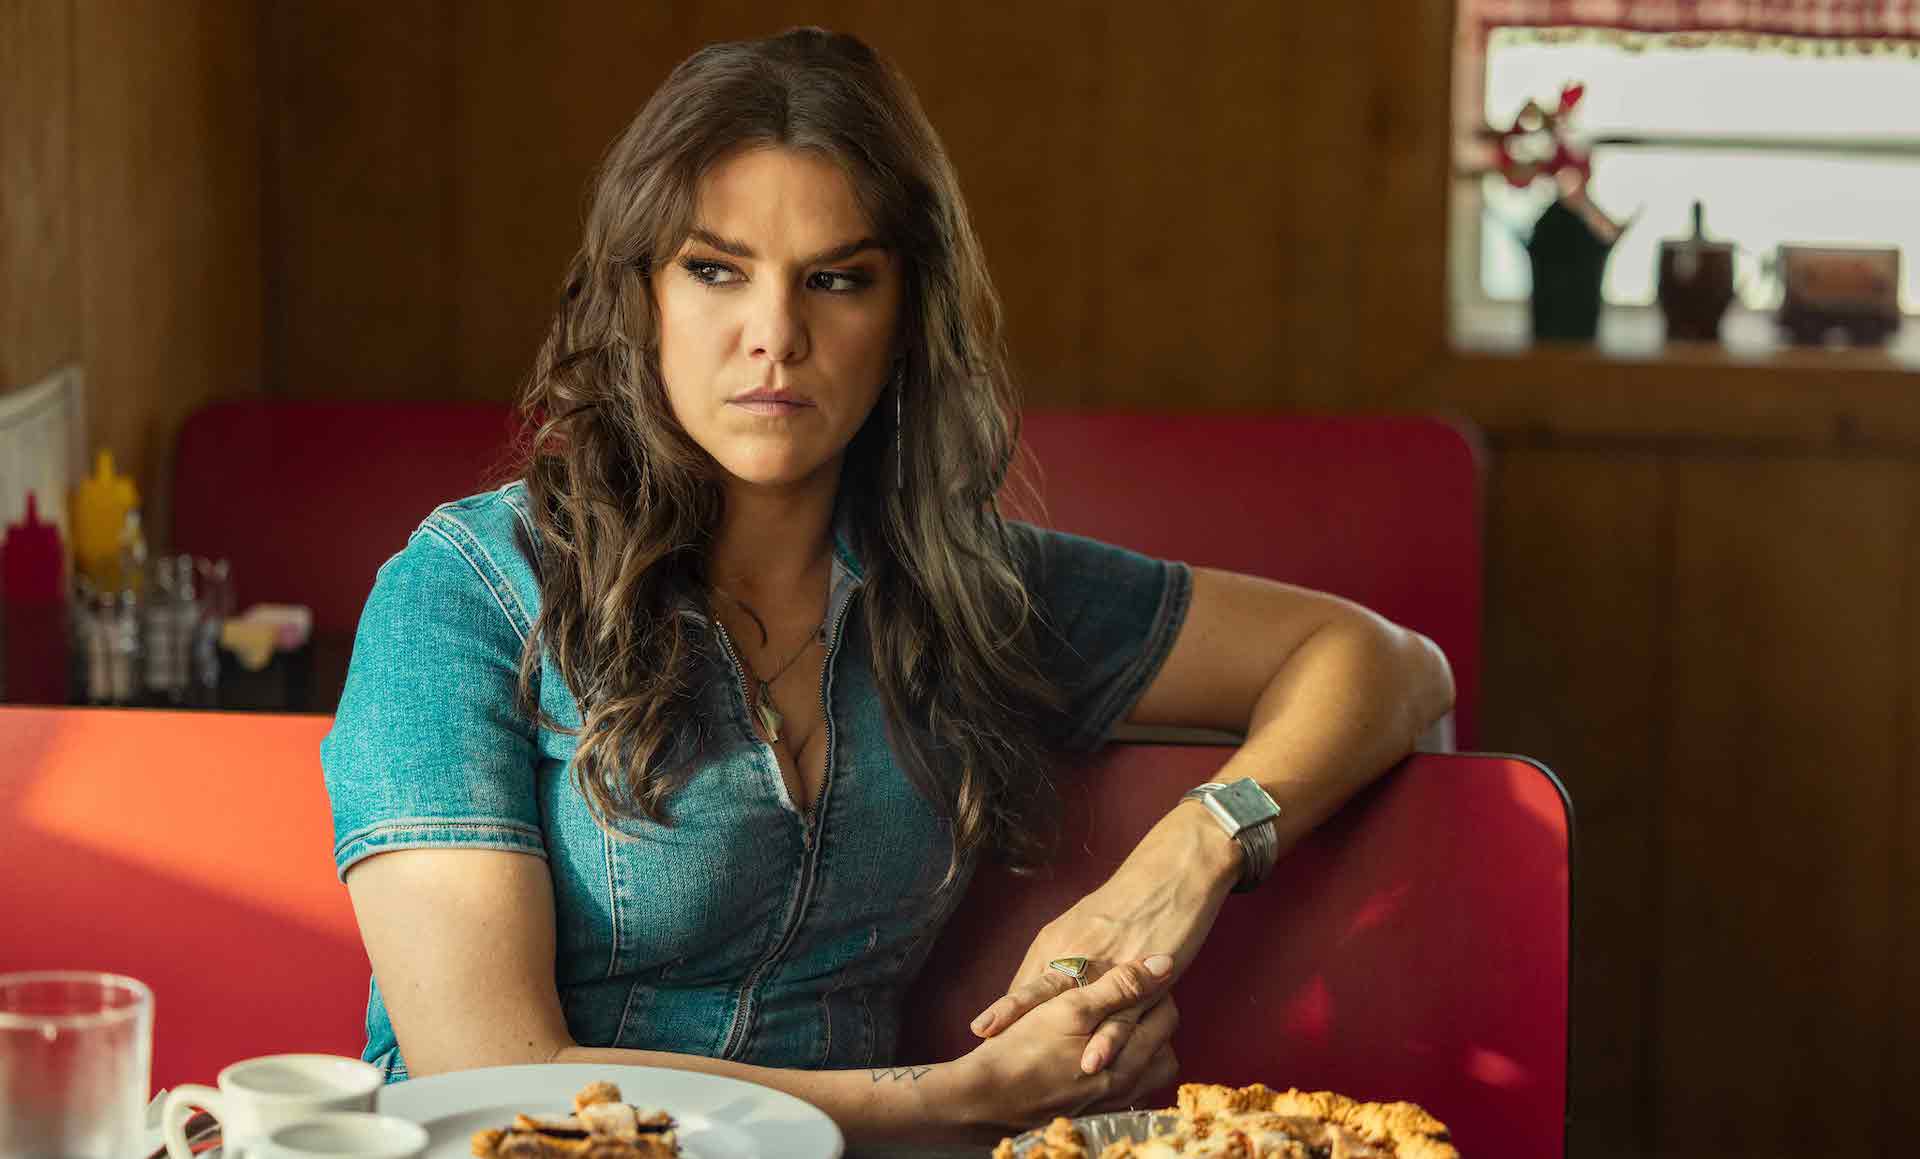 A woman with long, wavy brown hair wearing a denim zip-up top and sitting in a red diner booth in front of a whole pie; still from 